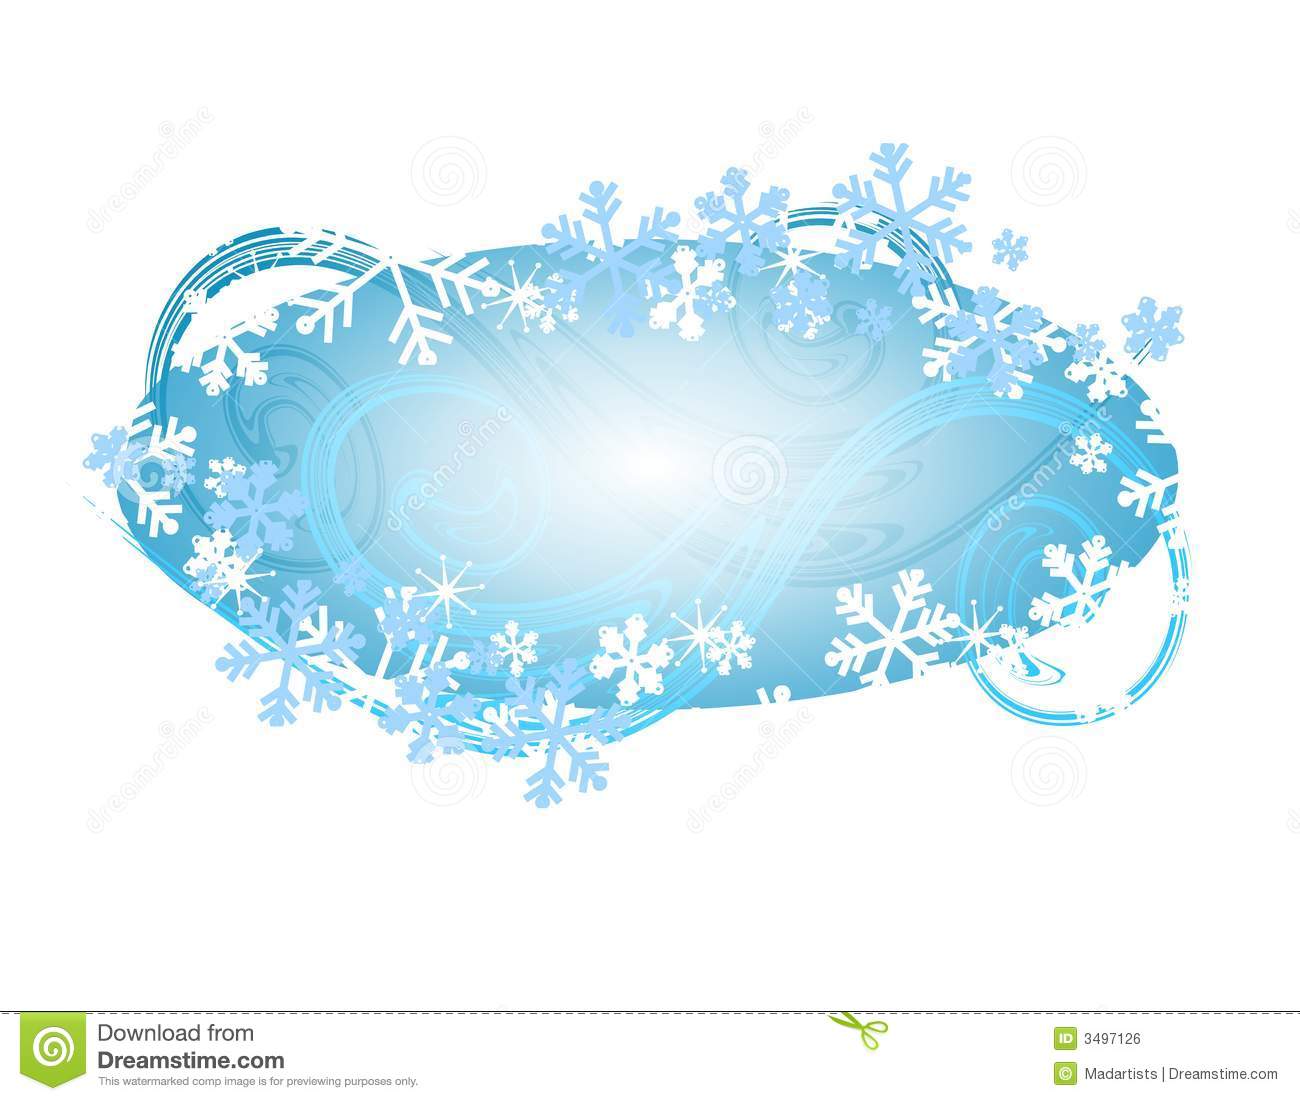 Shaped Logo Or Label Featuring Snowflake Border With Swirls In Blue